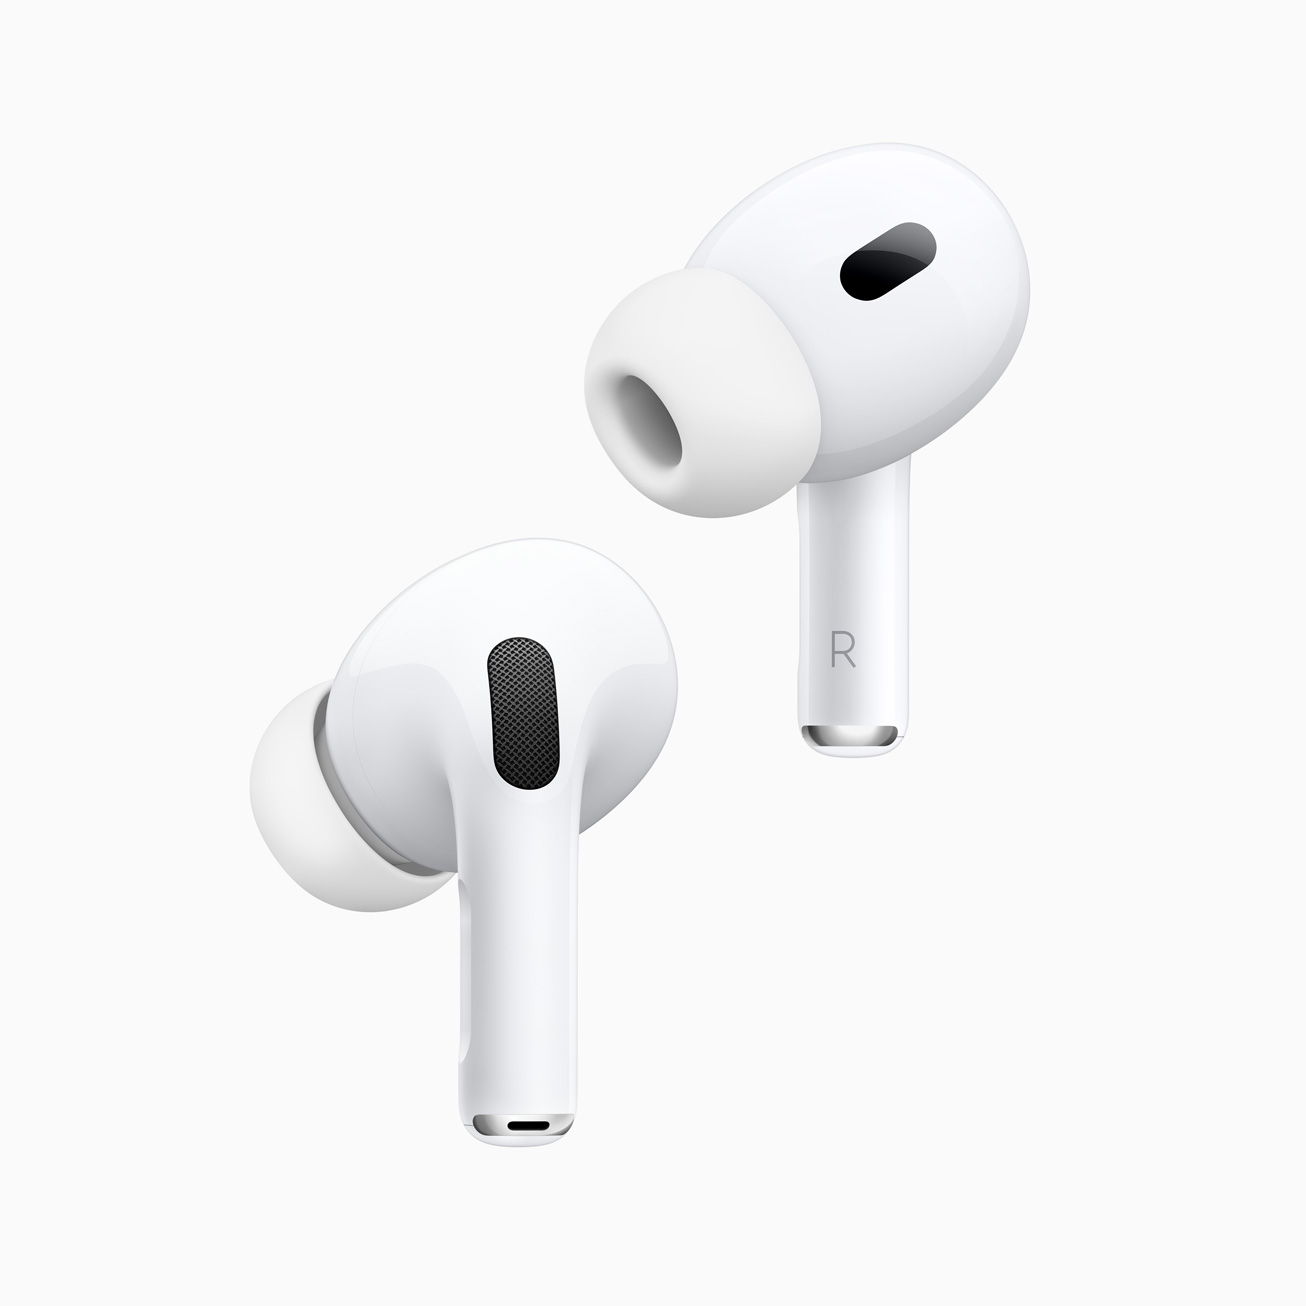 Supposed leaked 'AirPods 3' images suggest a blend of AirPods, AirPods Pro